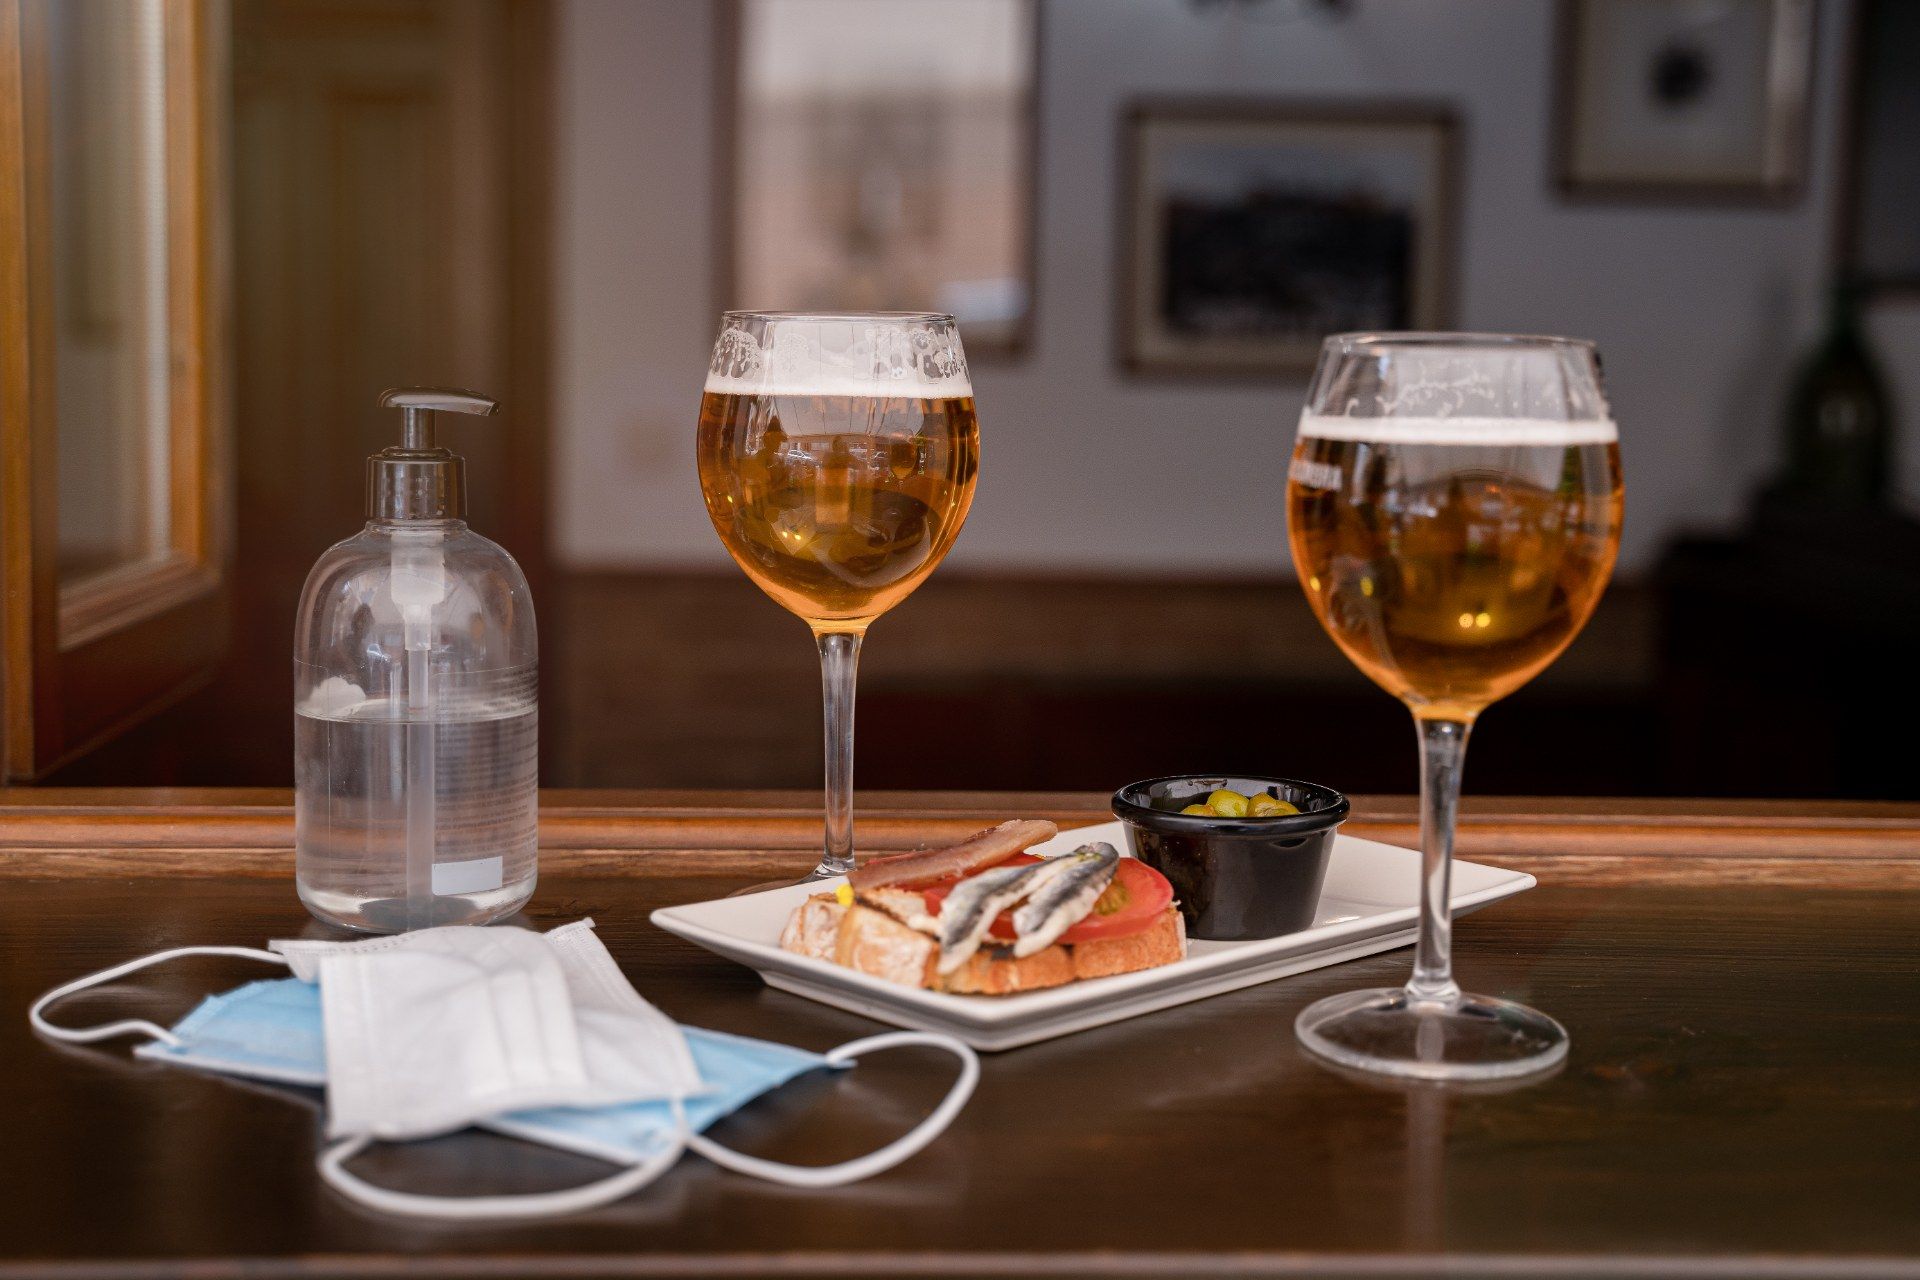 Food, two glasses of beer and personal protective equipment on a bar - pub curfew